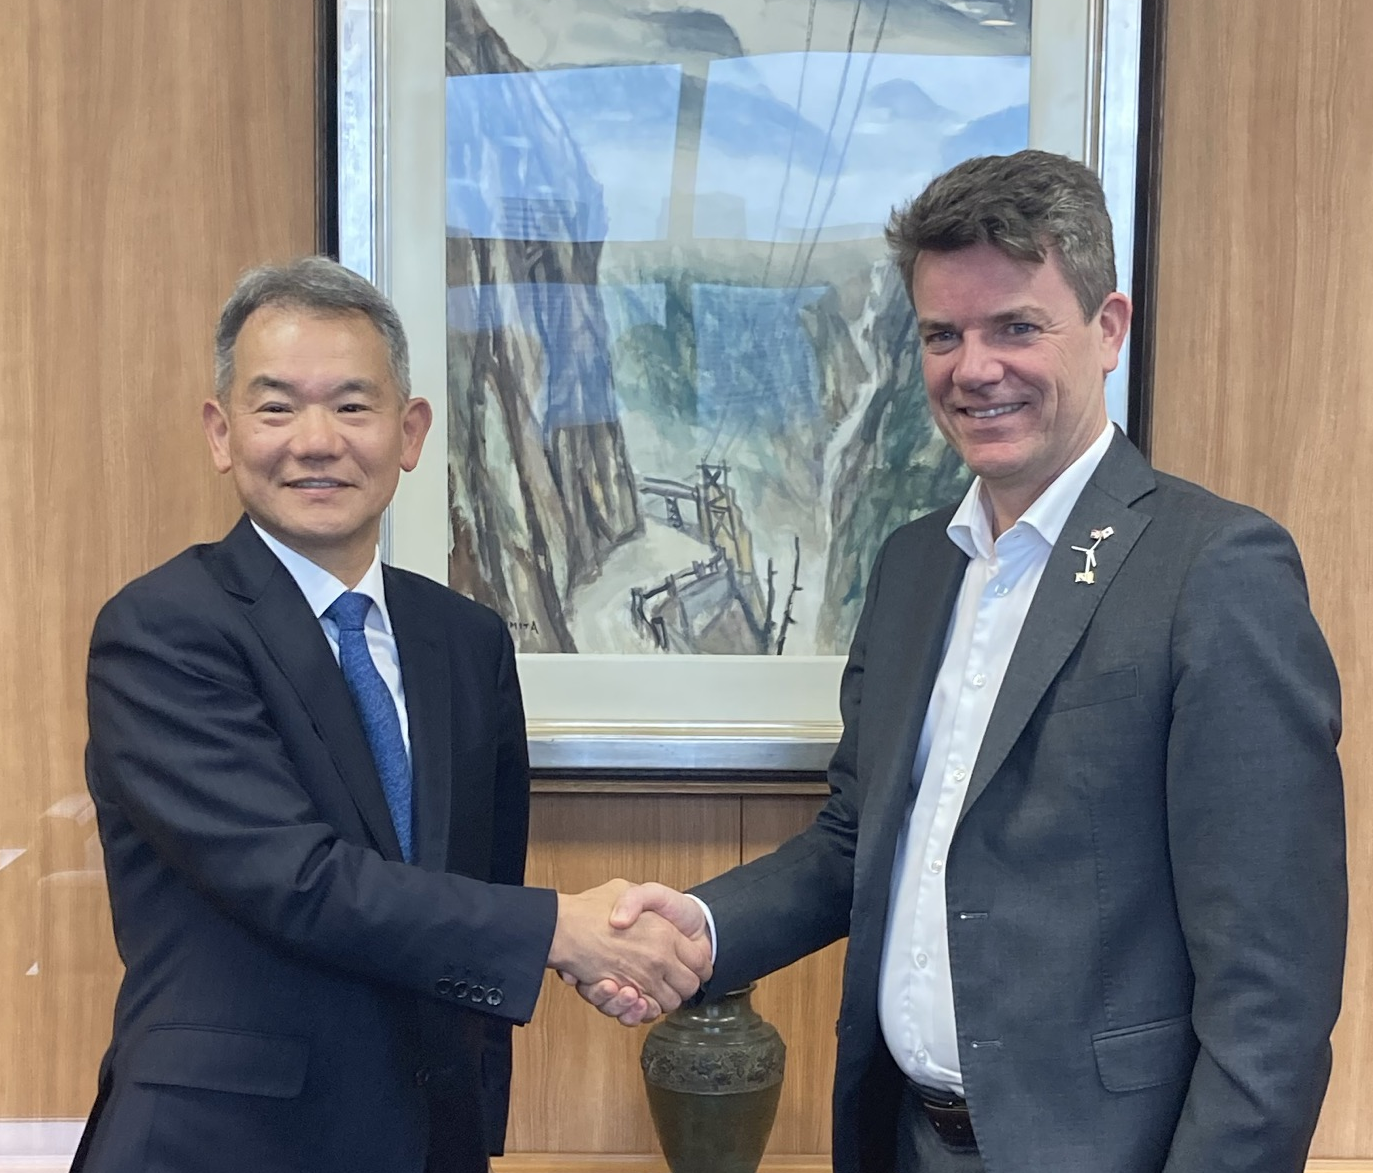 Kansai Electric Power Company becomes a large shareholder in Odfjell Oceanwind AS